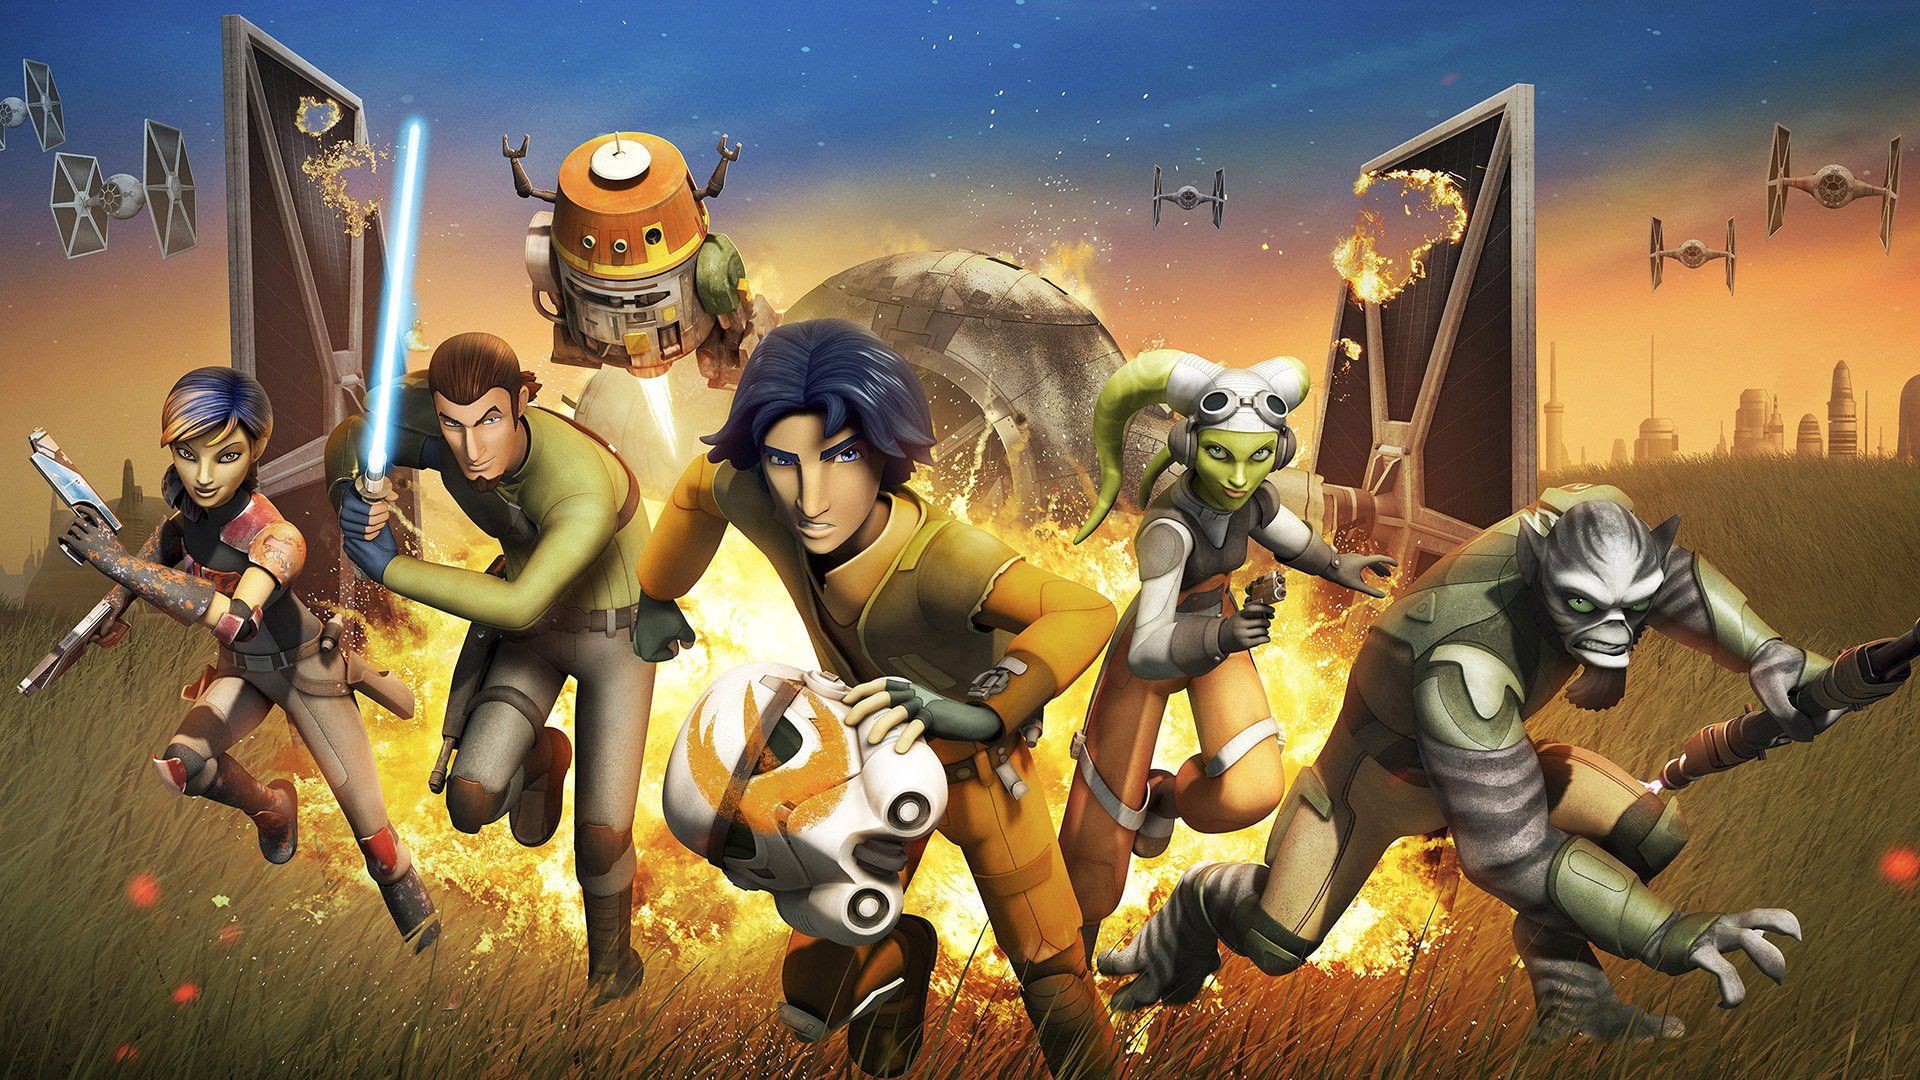 The animated cast of Star Wars Rebels